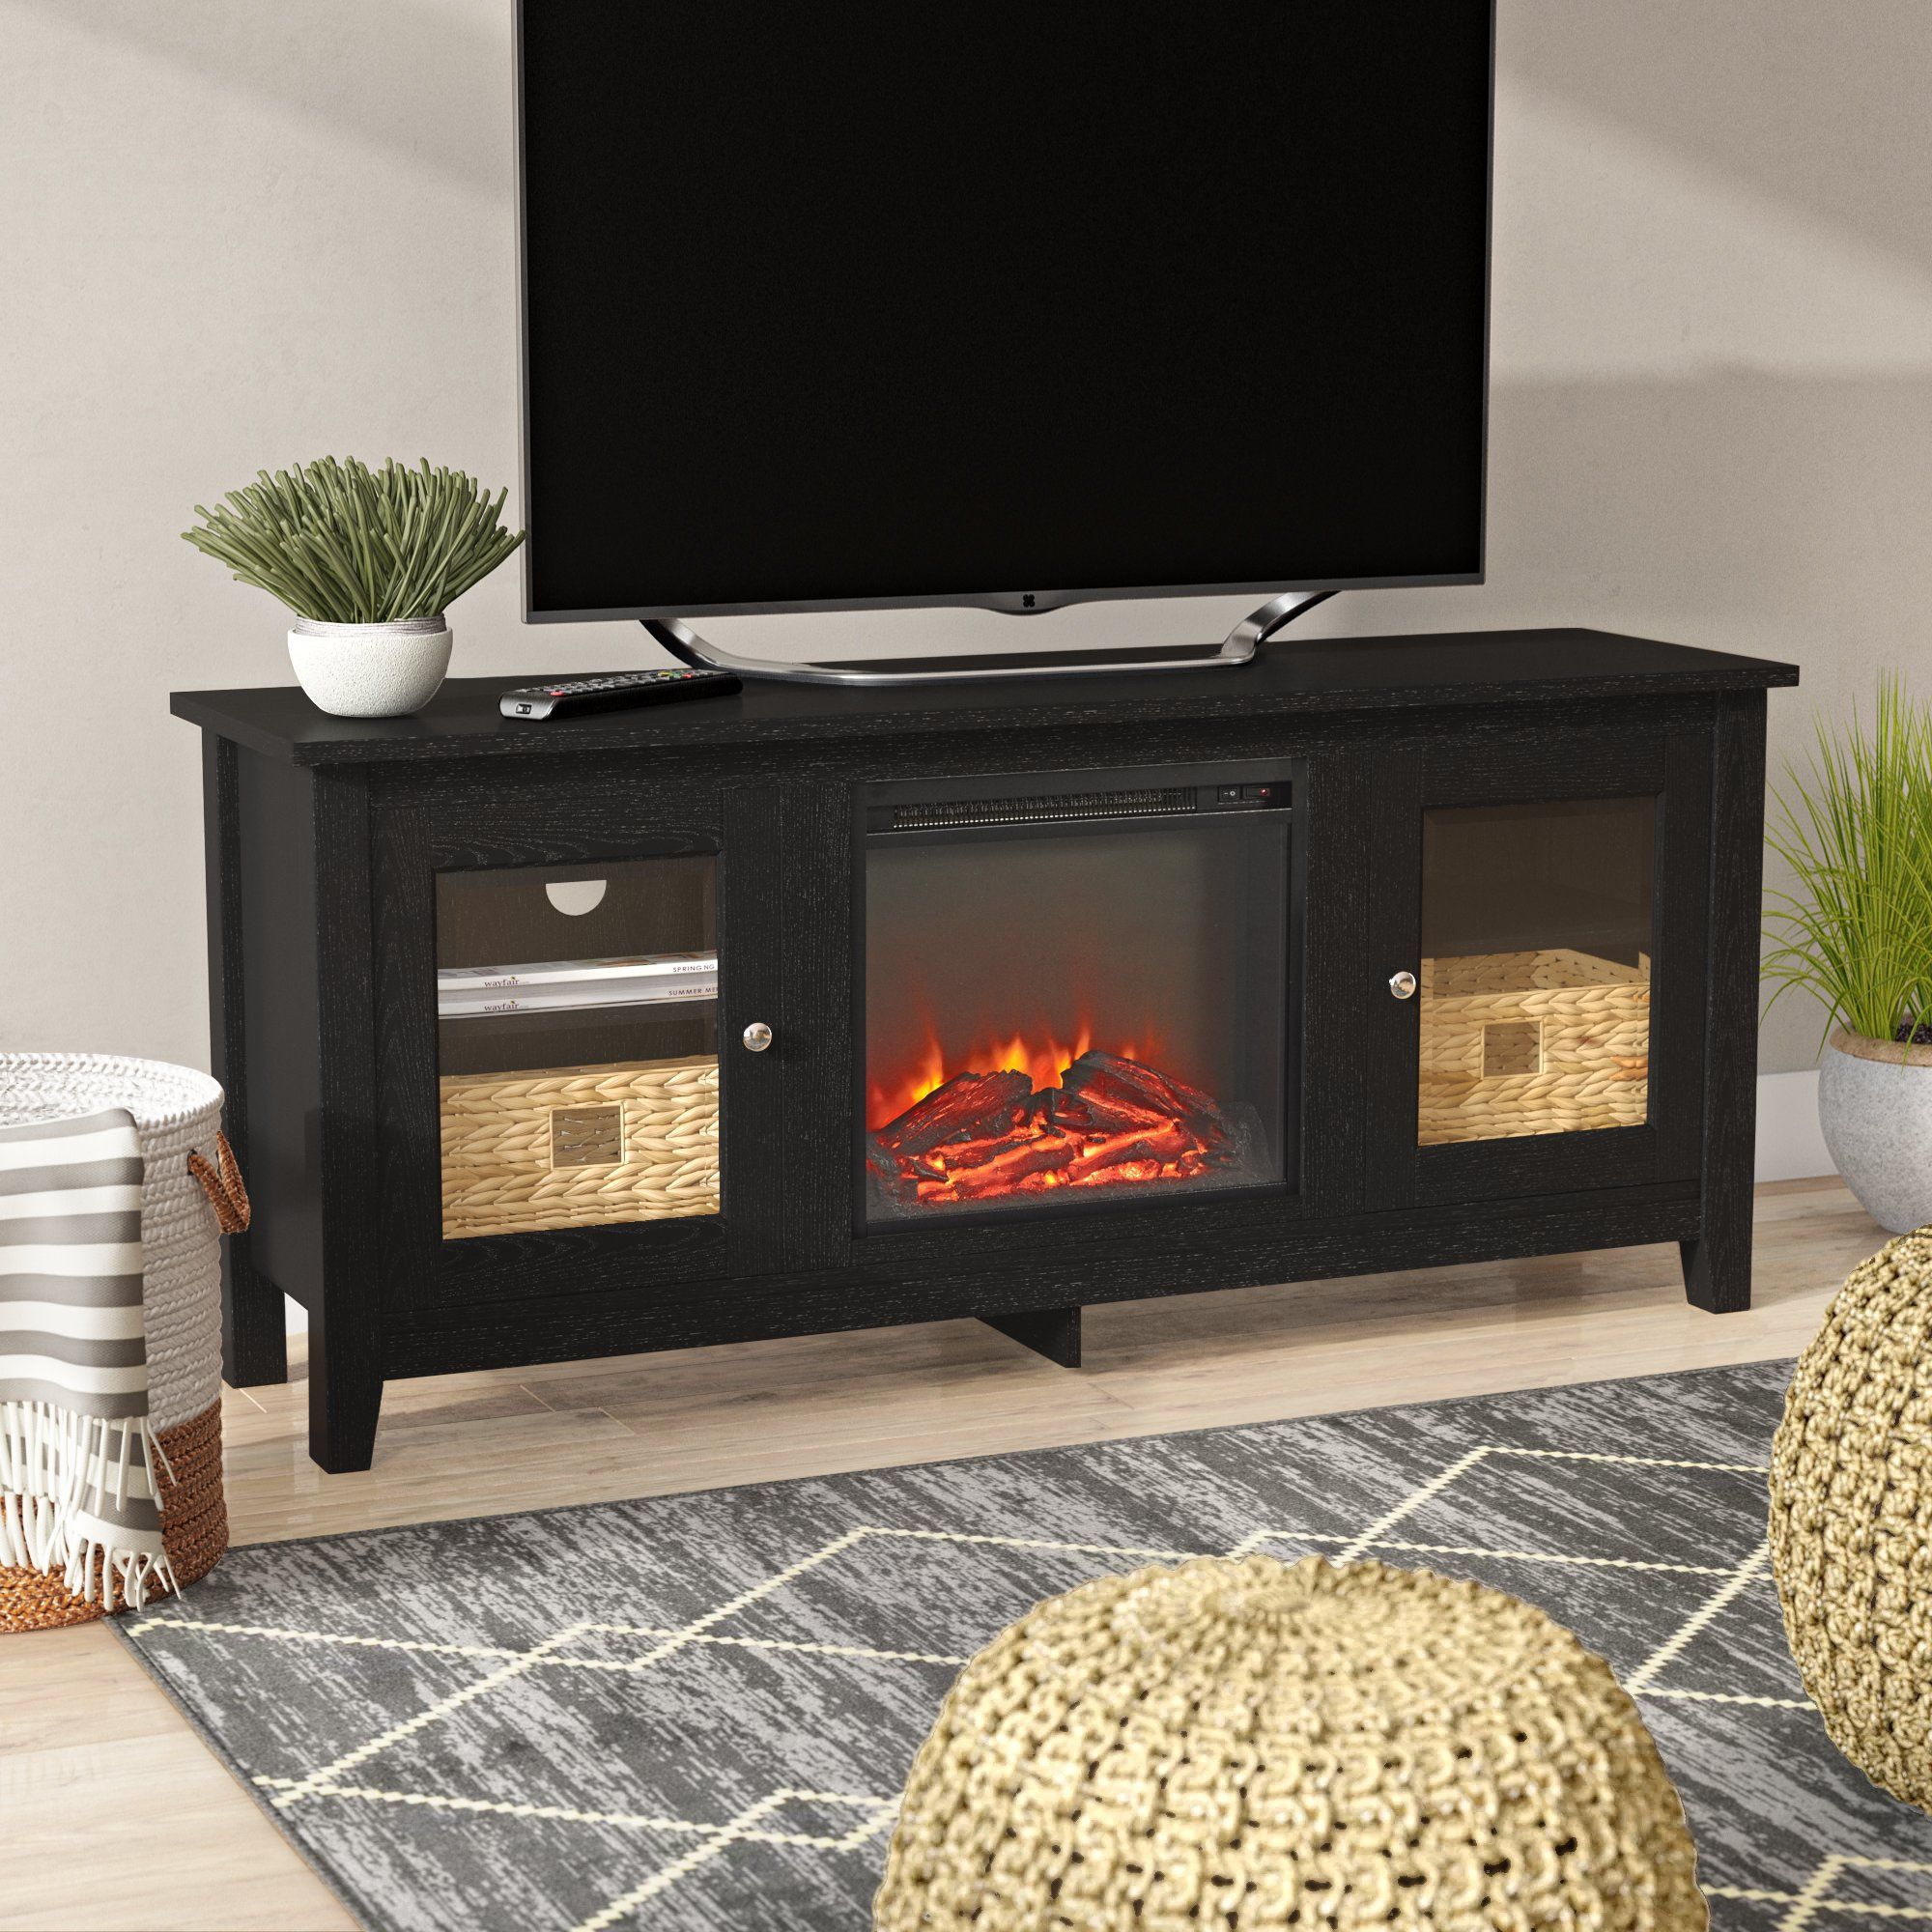 Fireplace Tv Stands & Entertainment Centers You'll Love | Wayfair (View 27 of 30)